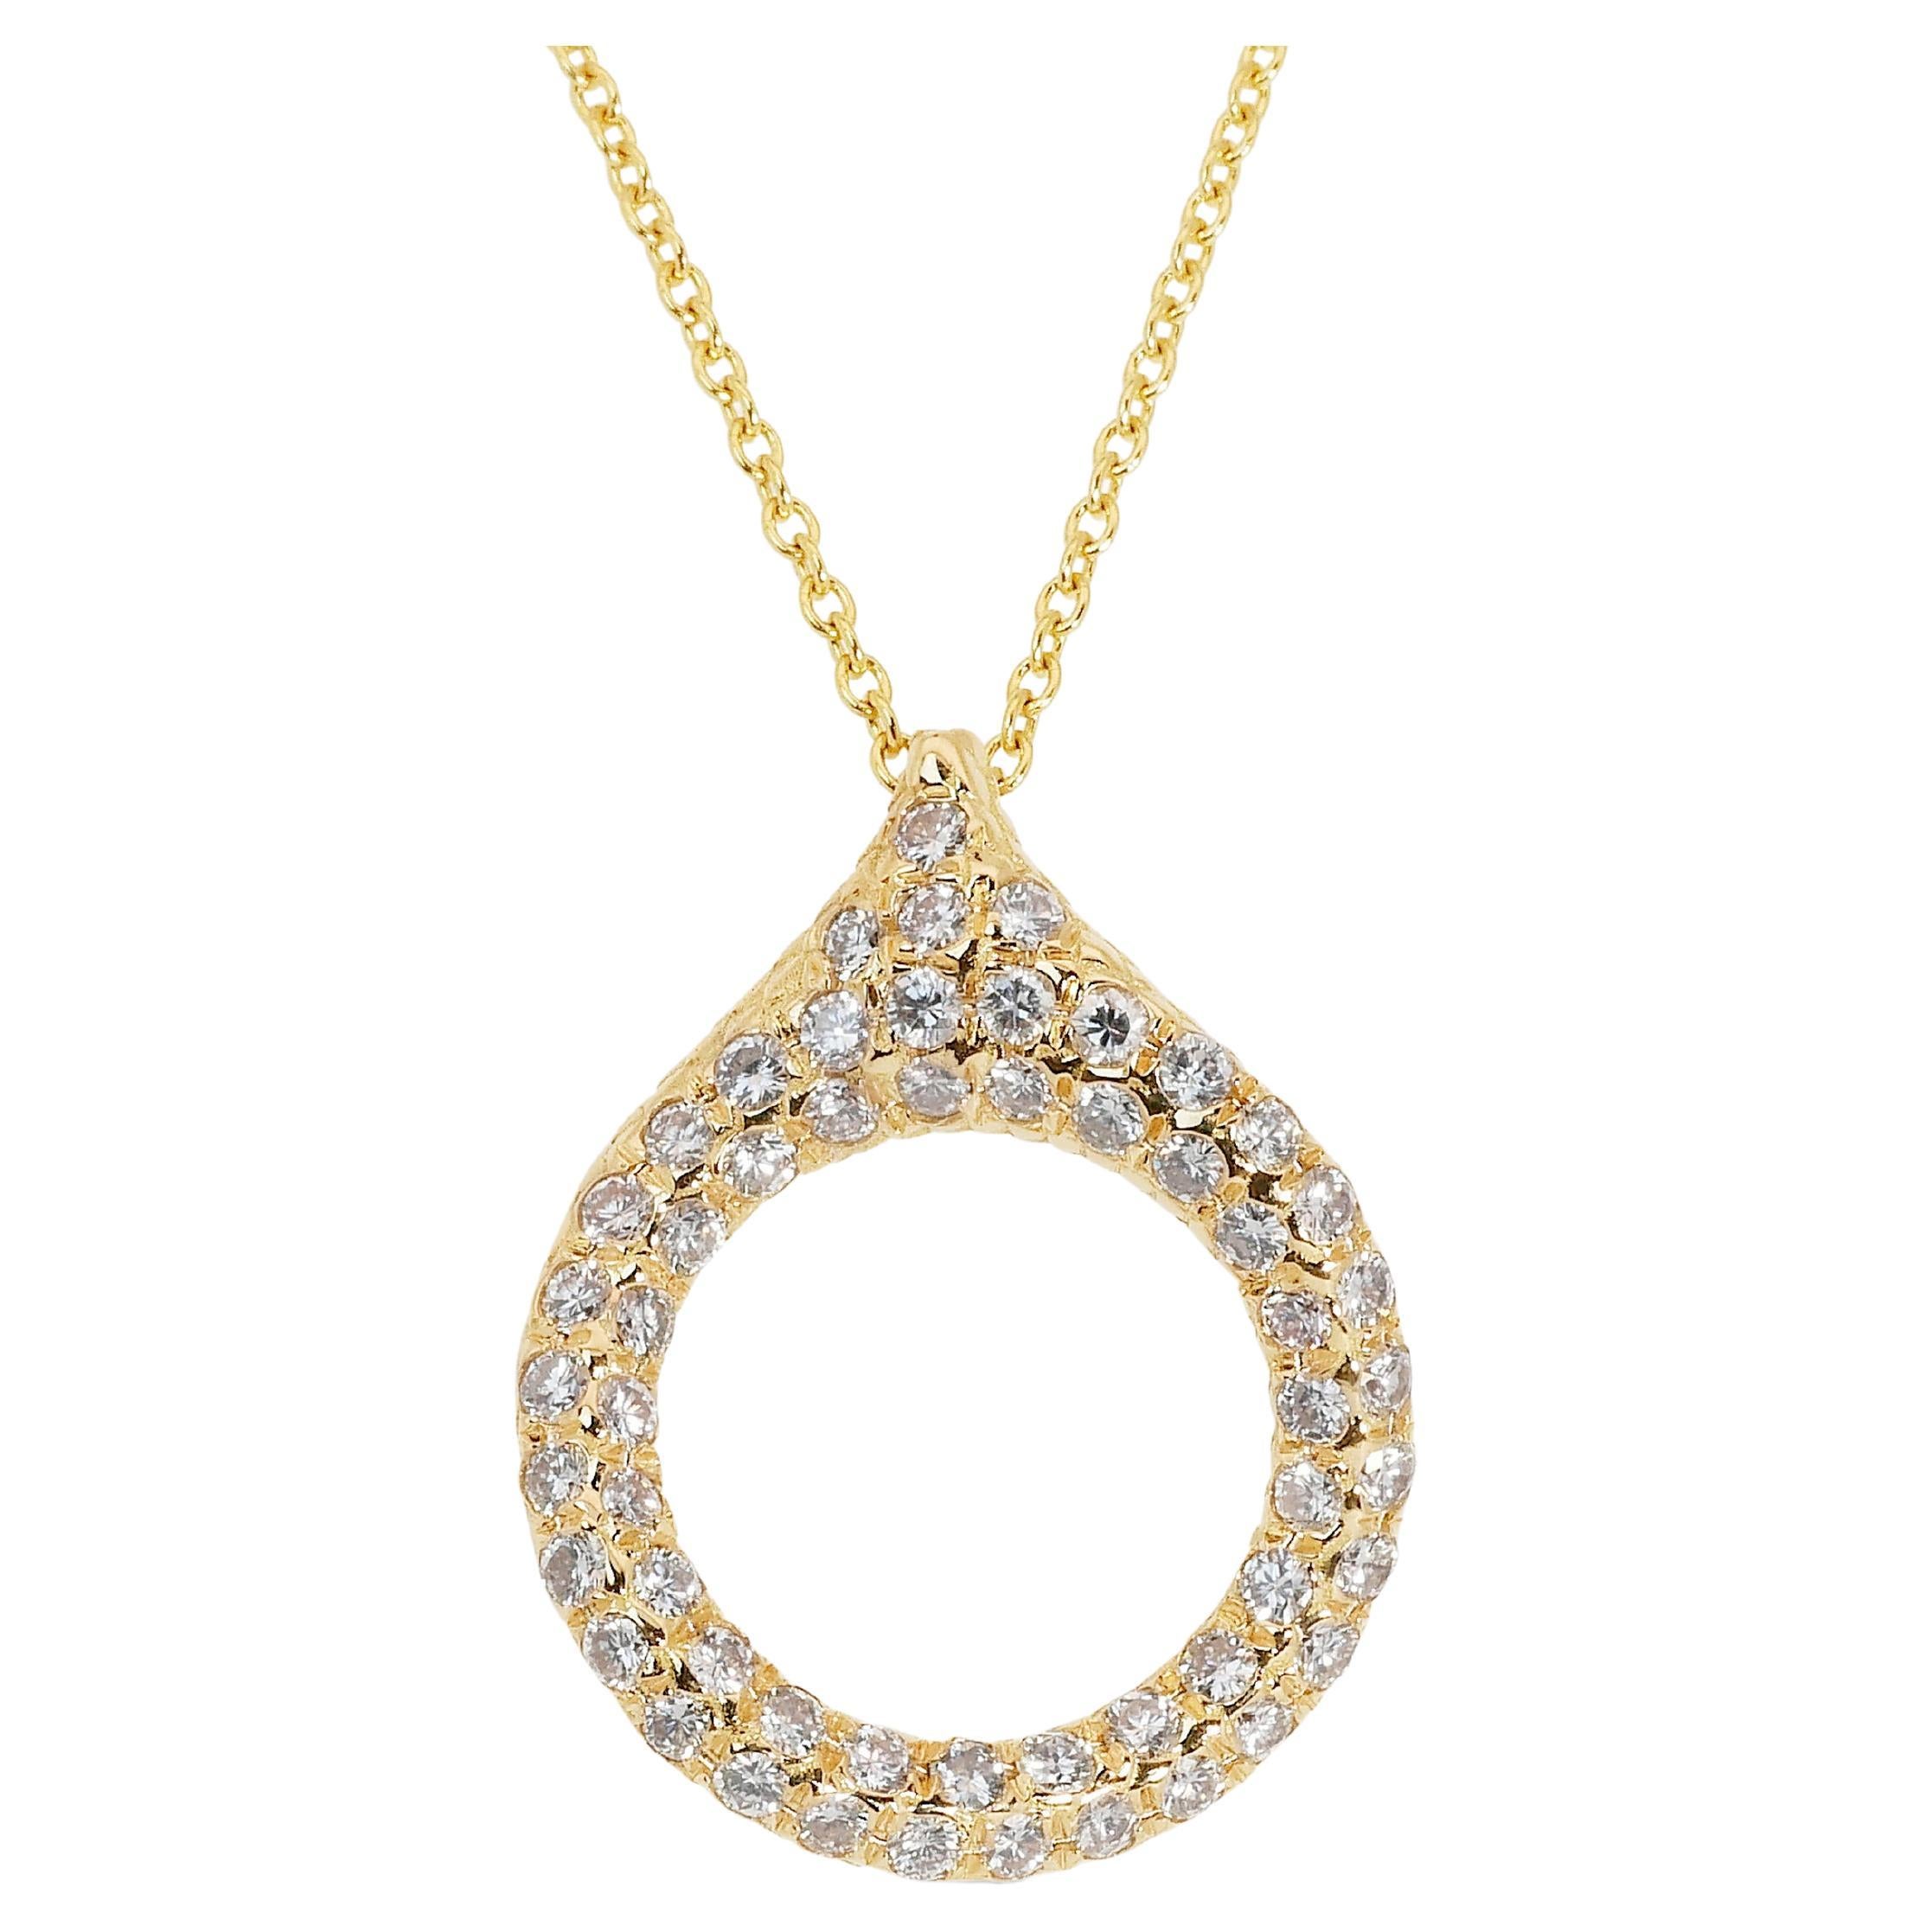 Dazzling 18k Yellow Gold Necklace w/ 1.16 Carat Natural Diamonds IGI Certificate For Sale